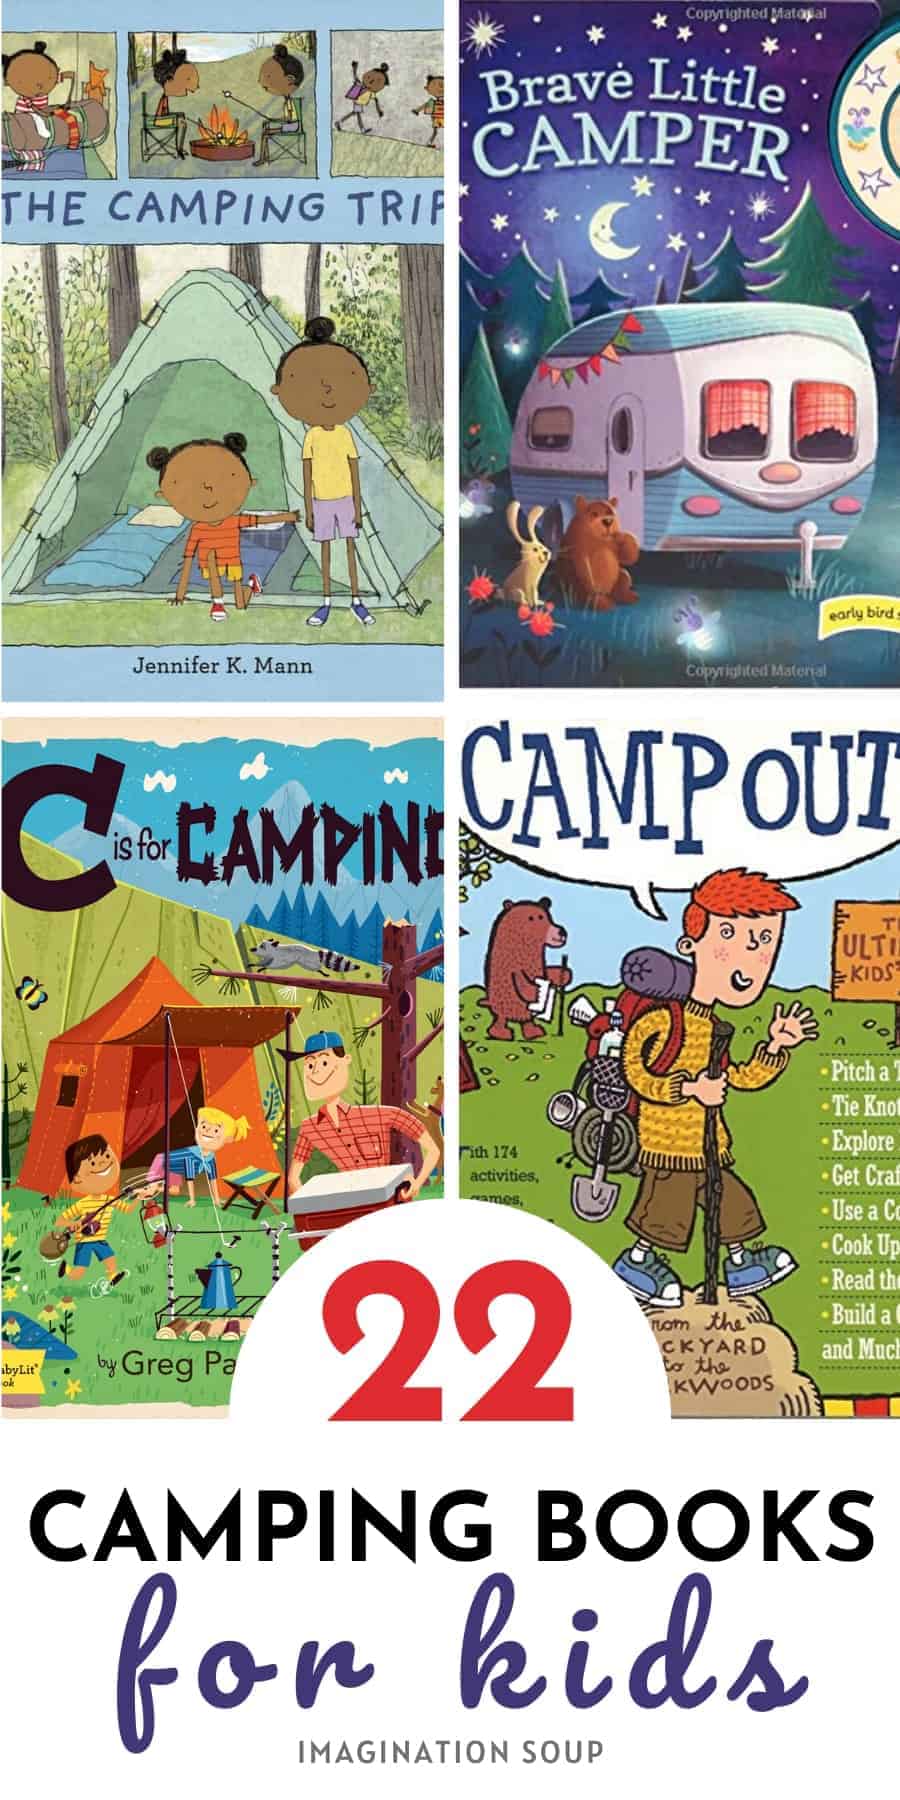 22 CAMPING BOOKS FOR KIDS